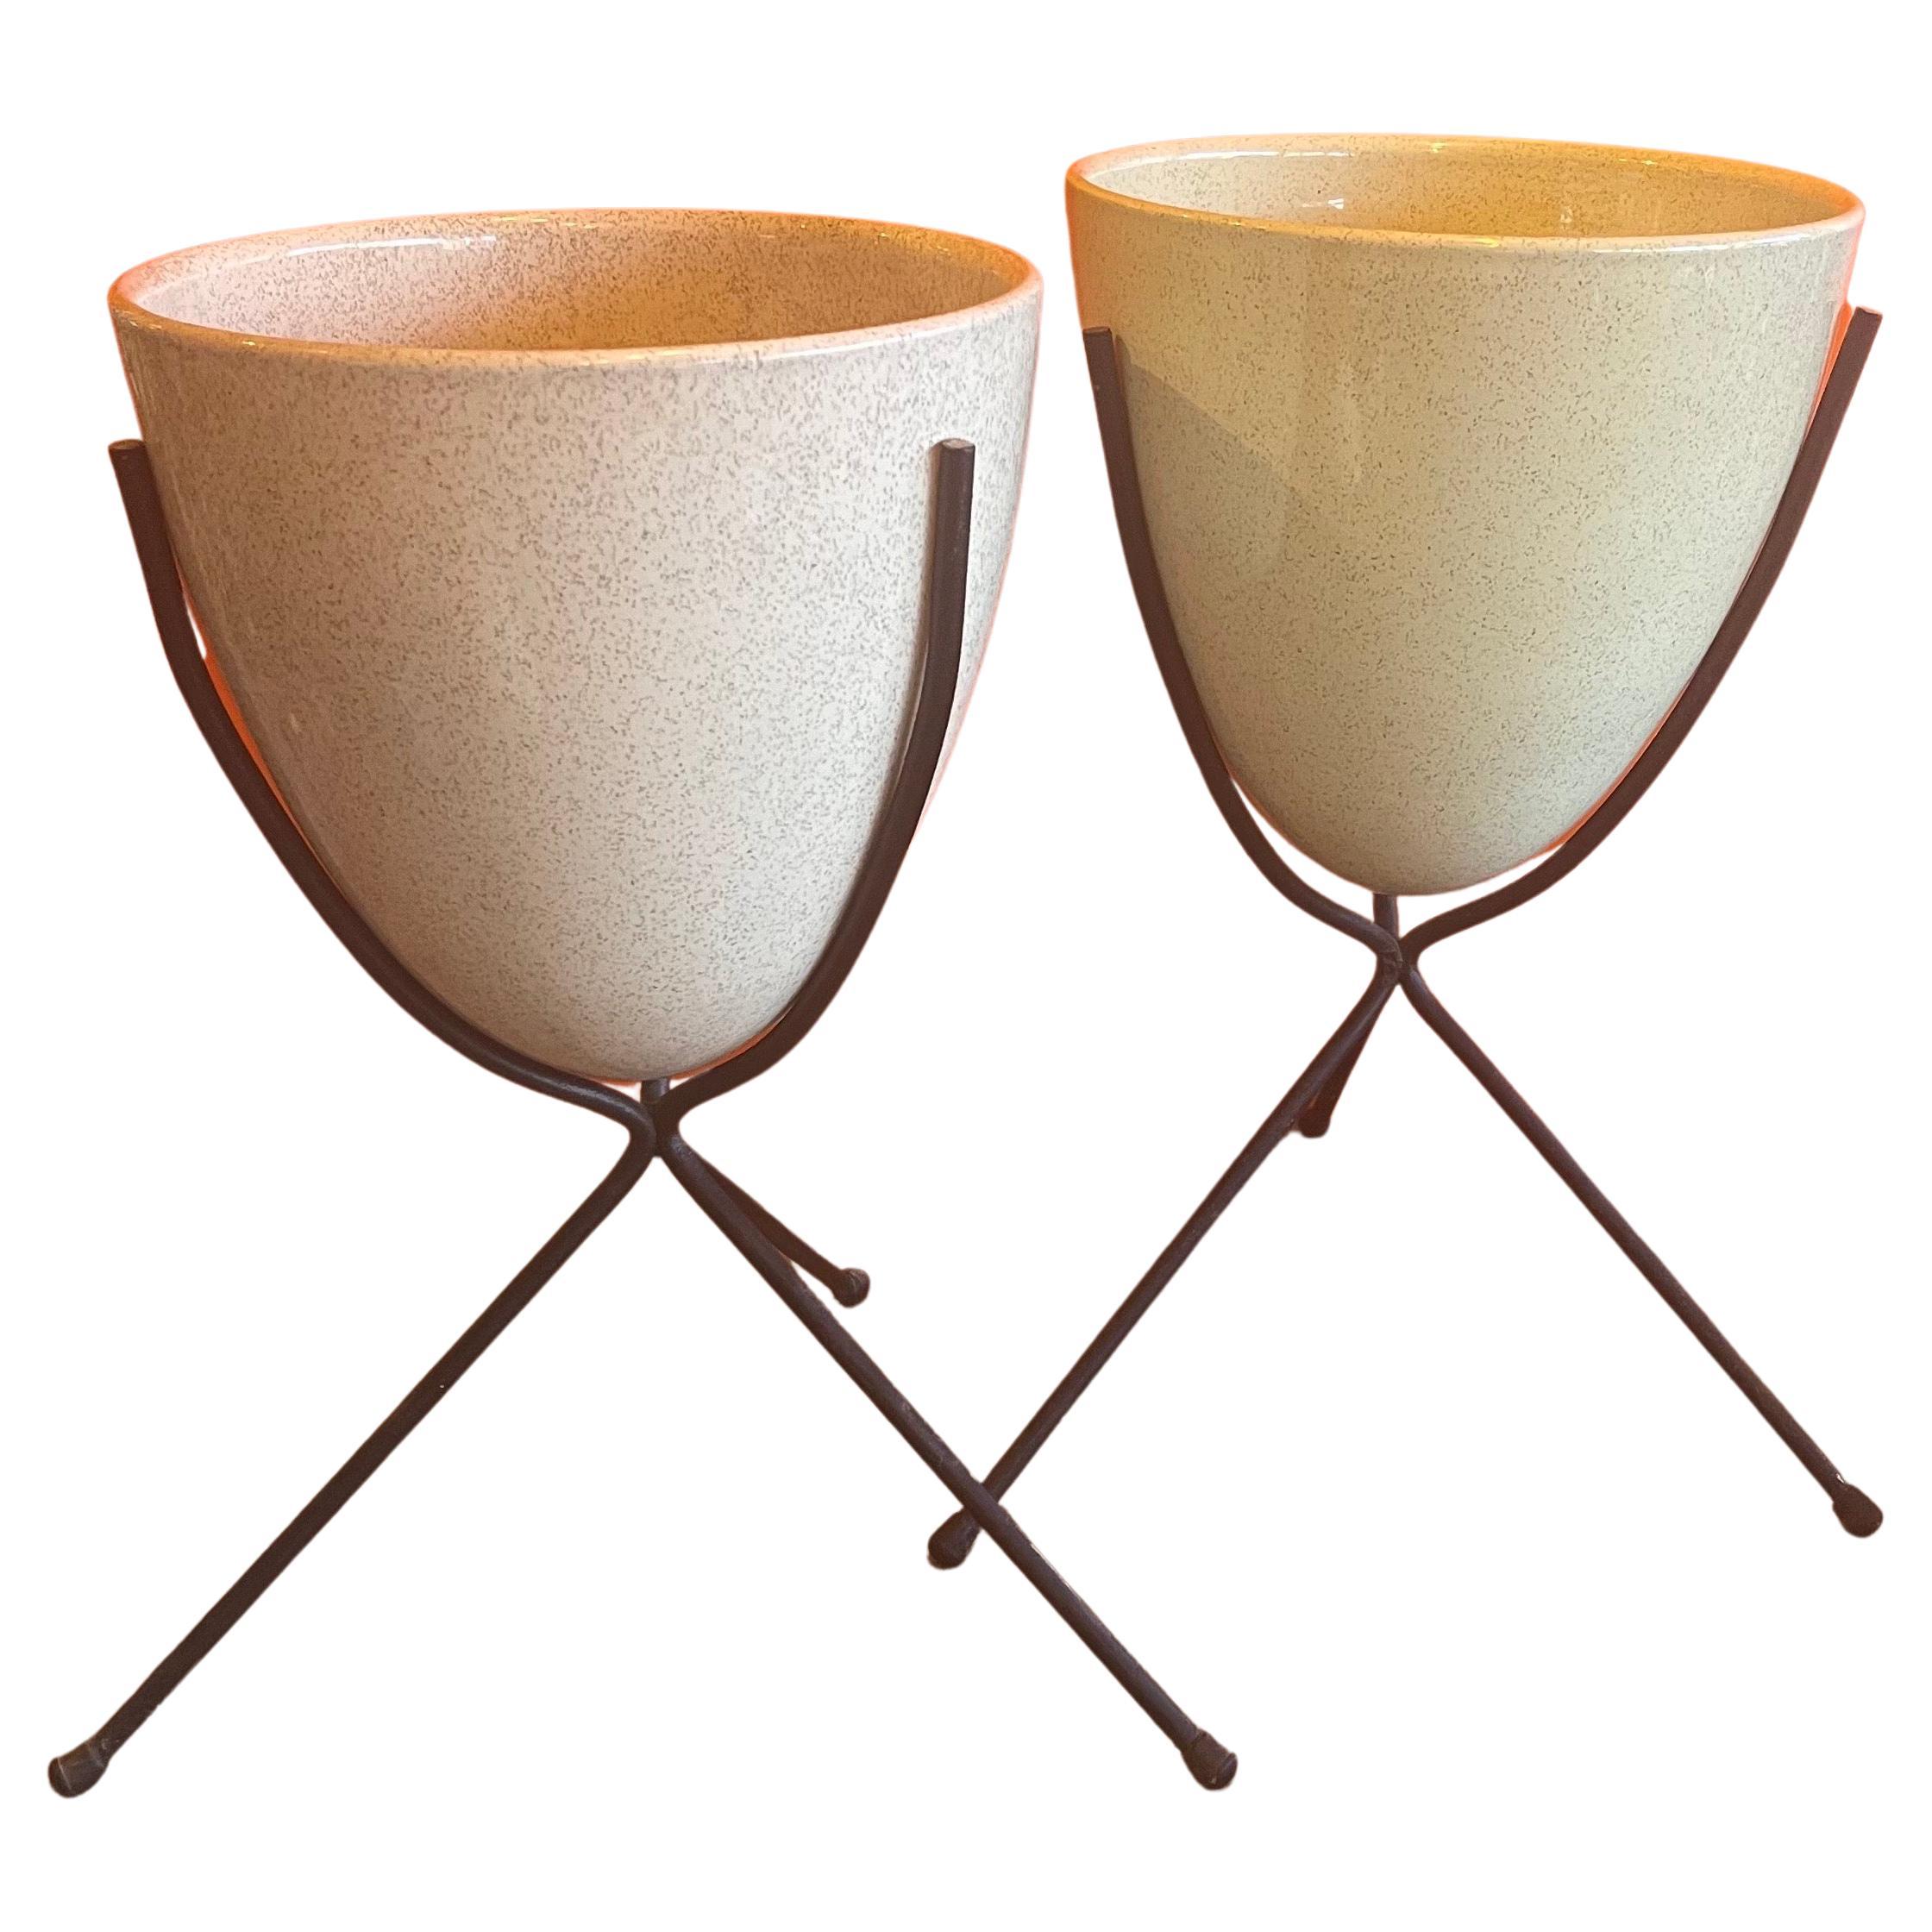 Rare Pair of Atomic Age Ceramic Bullet Planters on the Metal Stands by Bauer For Sale